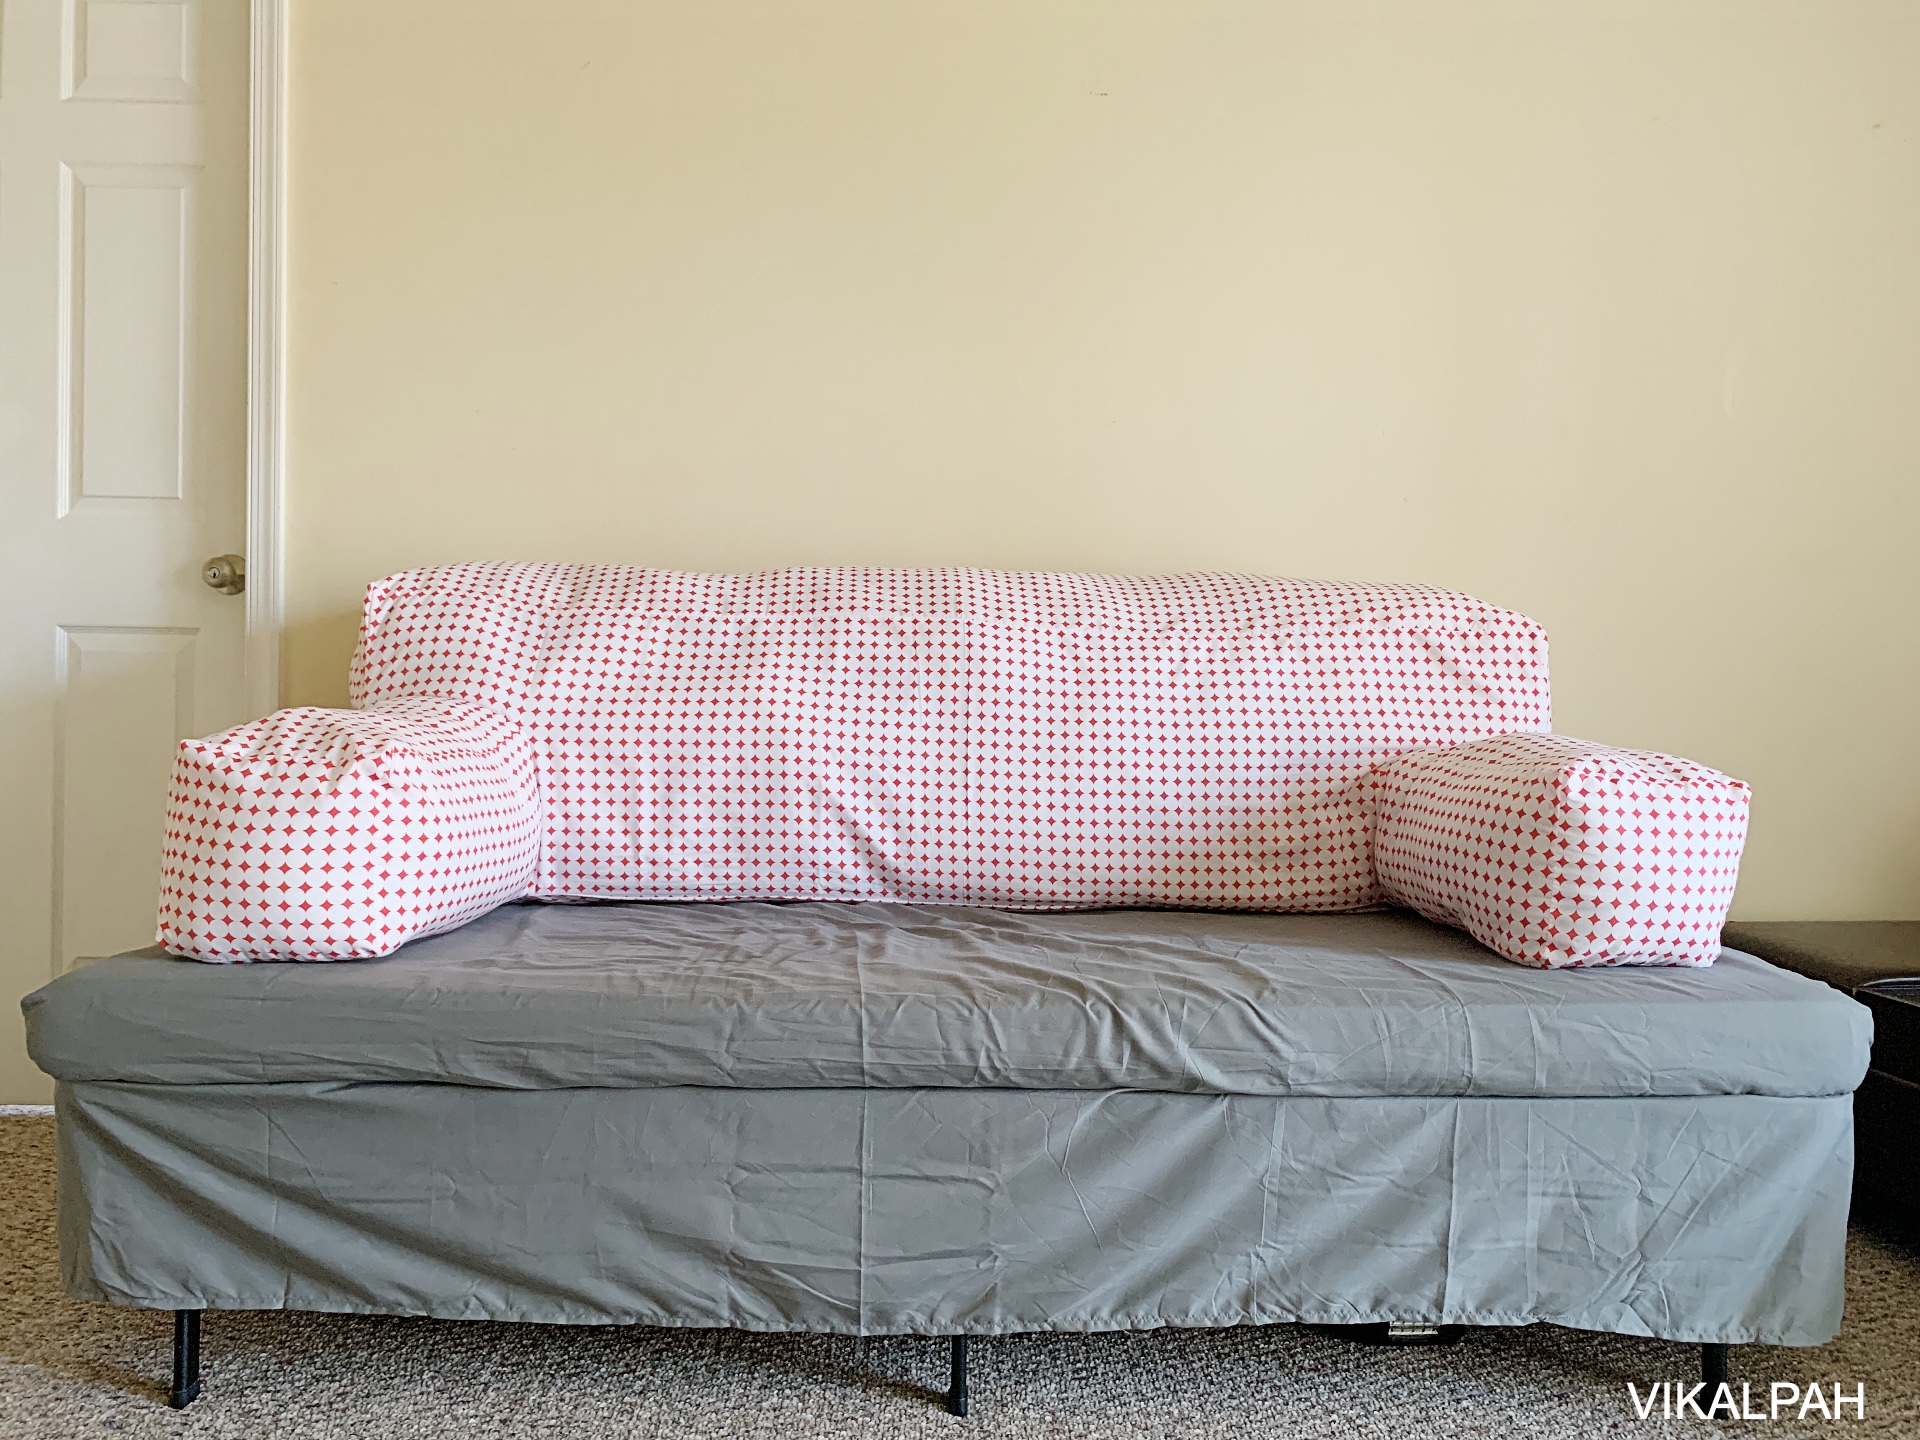 Twin Bed Into A Couch Diy Cover, Converting A Twin Bed Into A Daybed